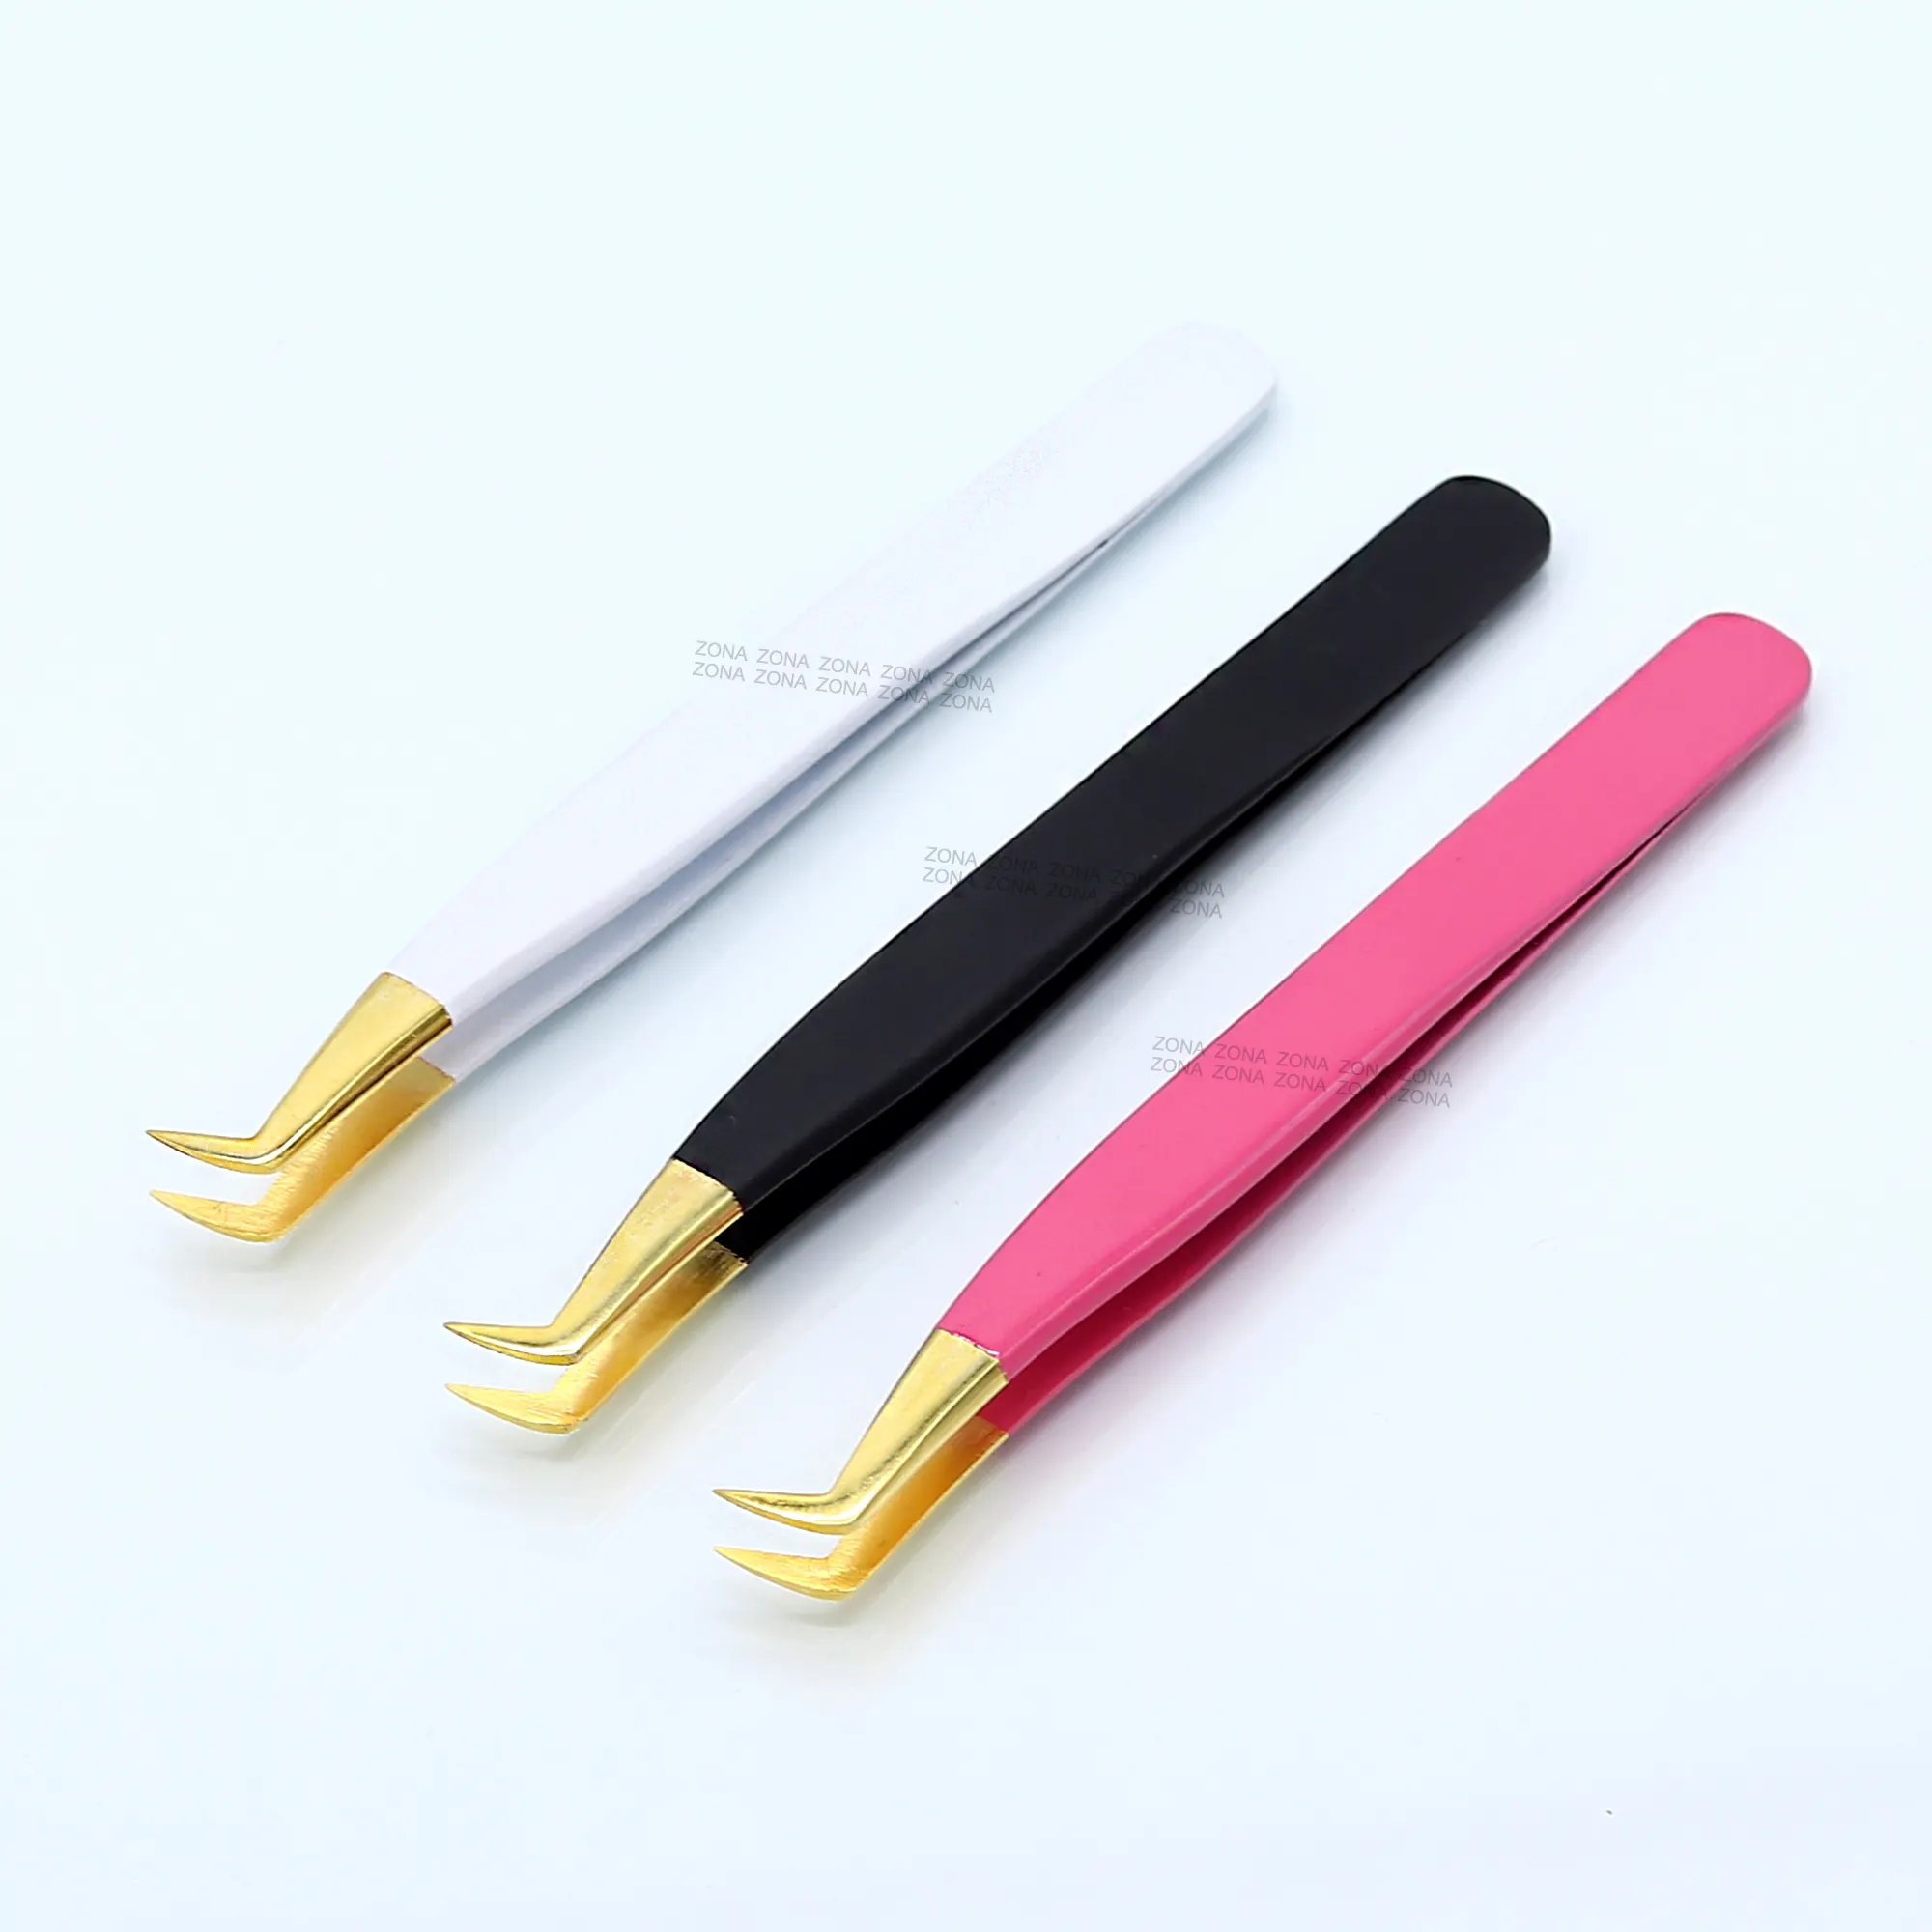 Gold Tips Pointed Edge Lash Tweezers Easy to Use Tweezers For Volume Extensions Best Tweezers for Fanning Lashes Stainless Steel